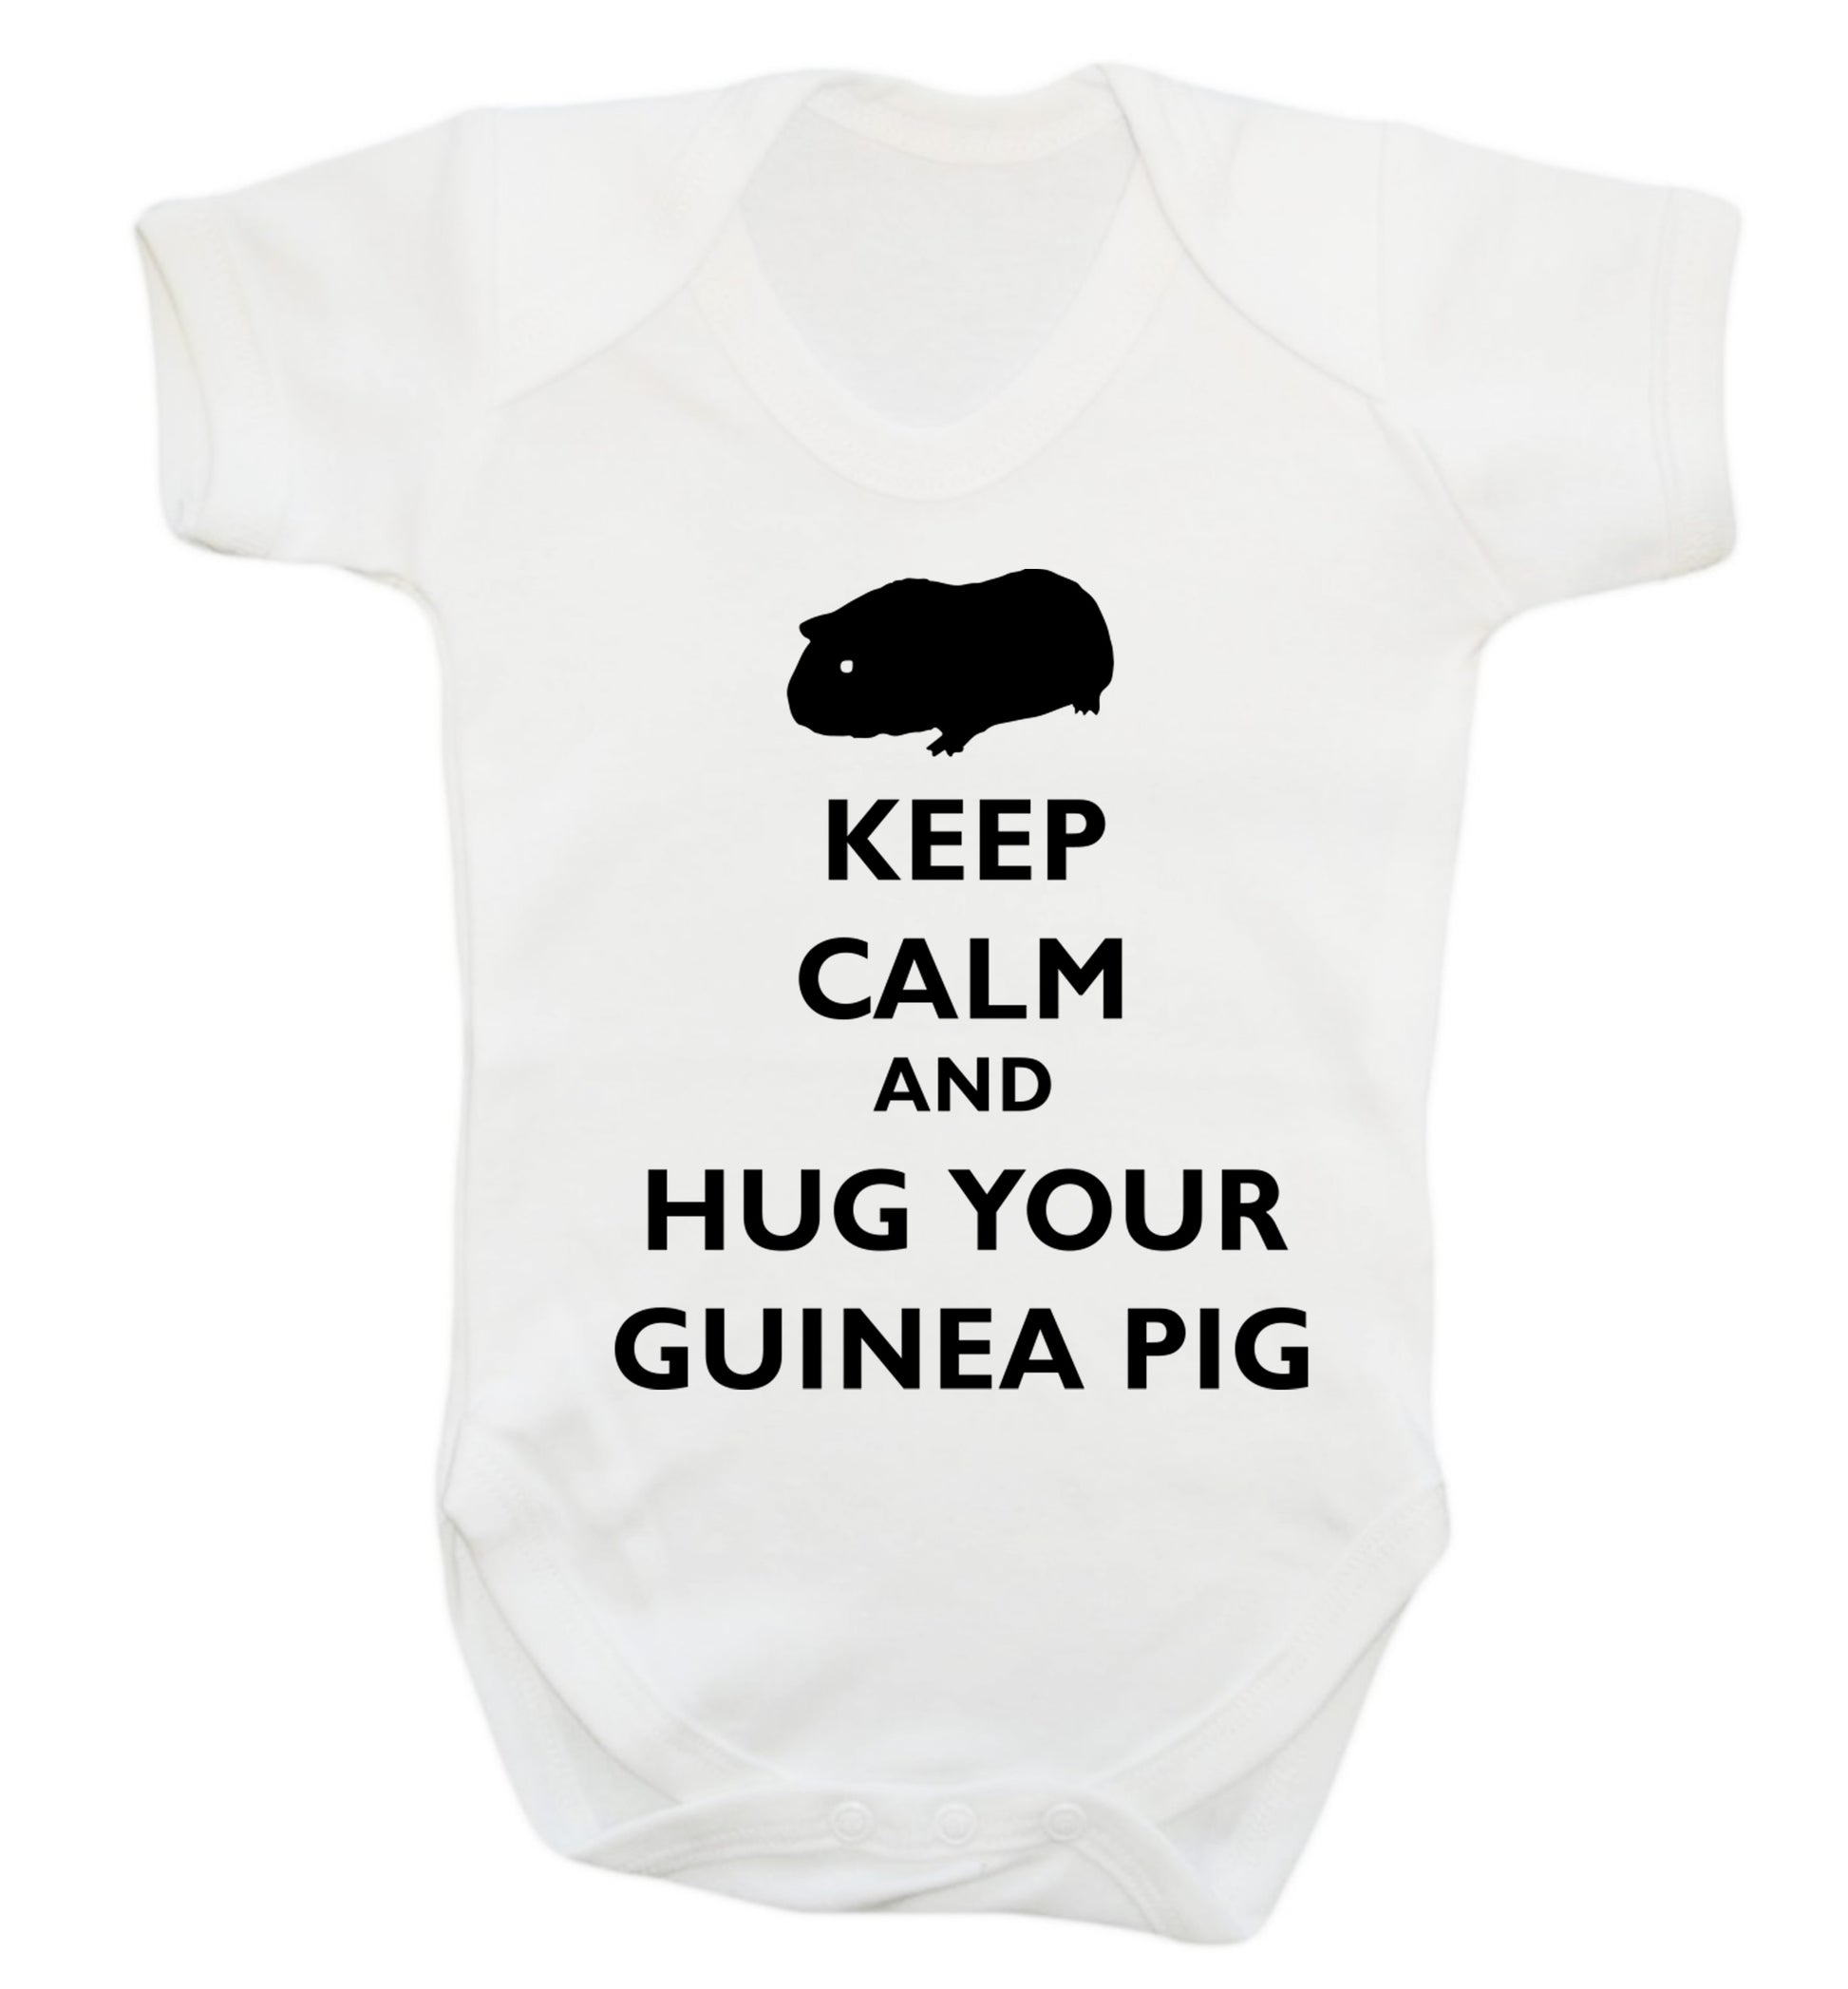 Keep calm and hug your guineapig Baby Vest white 18-24 months